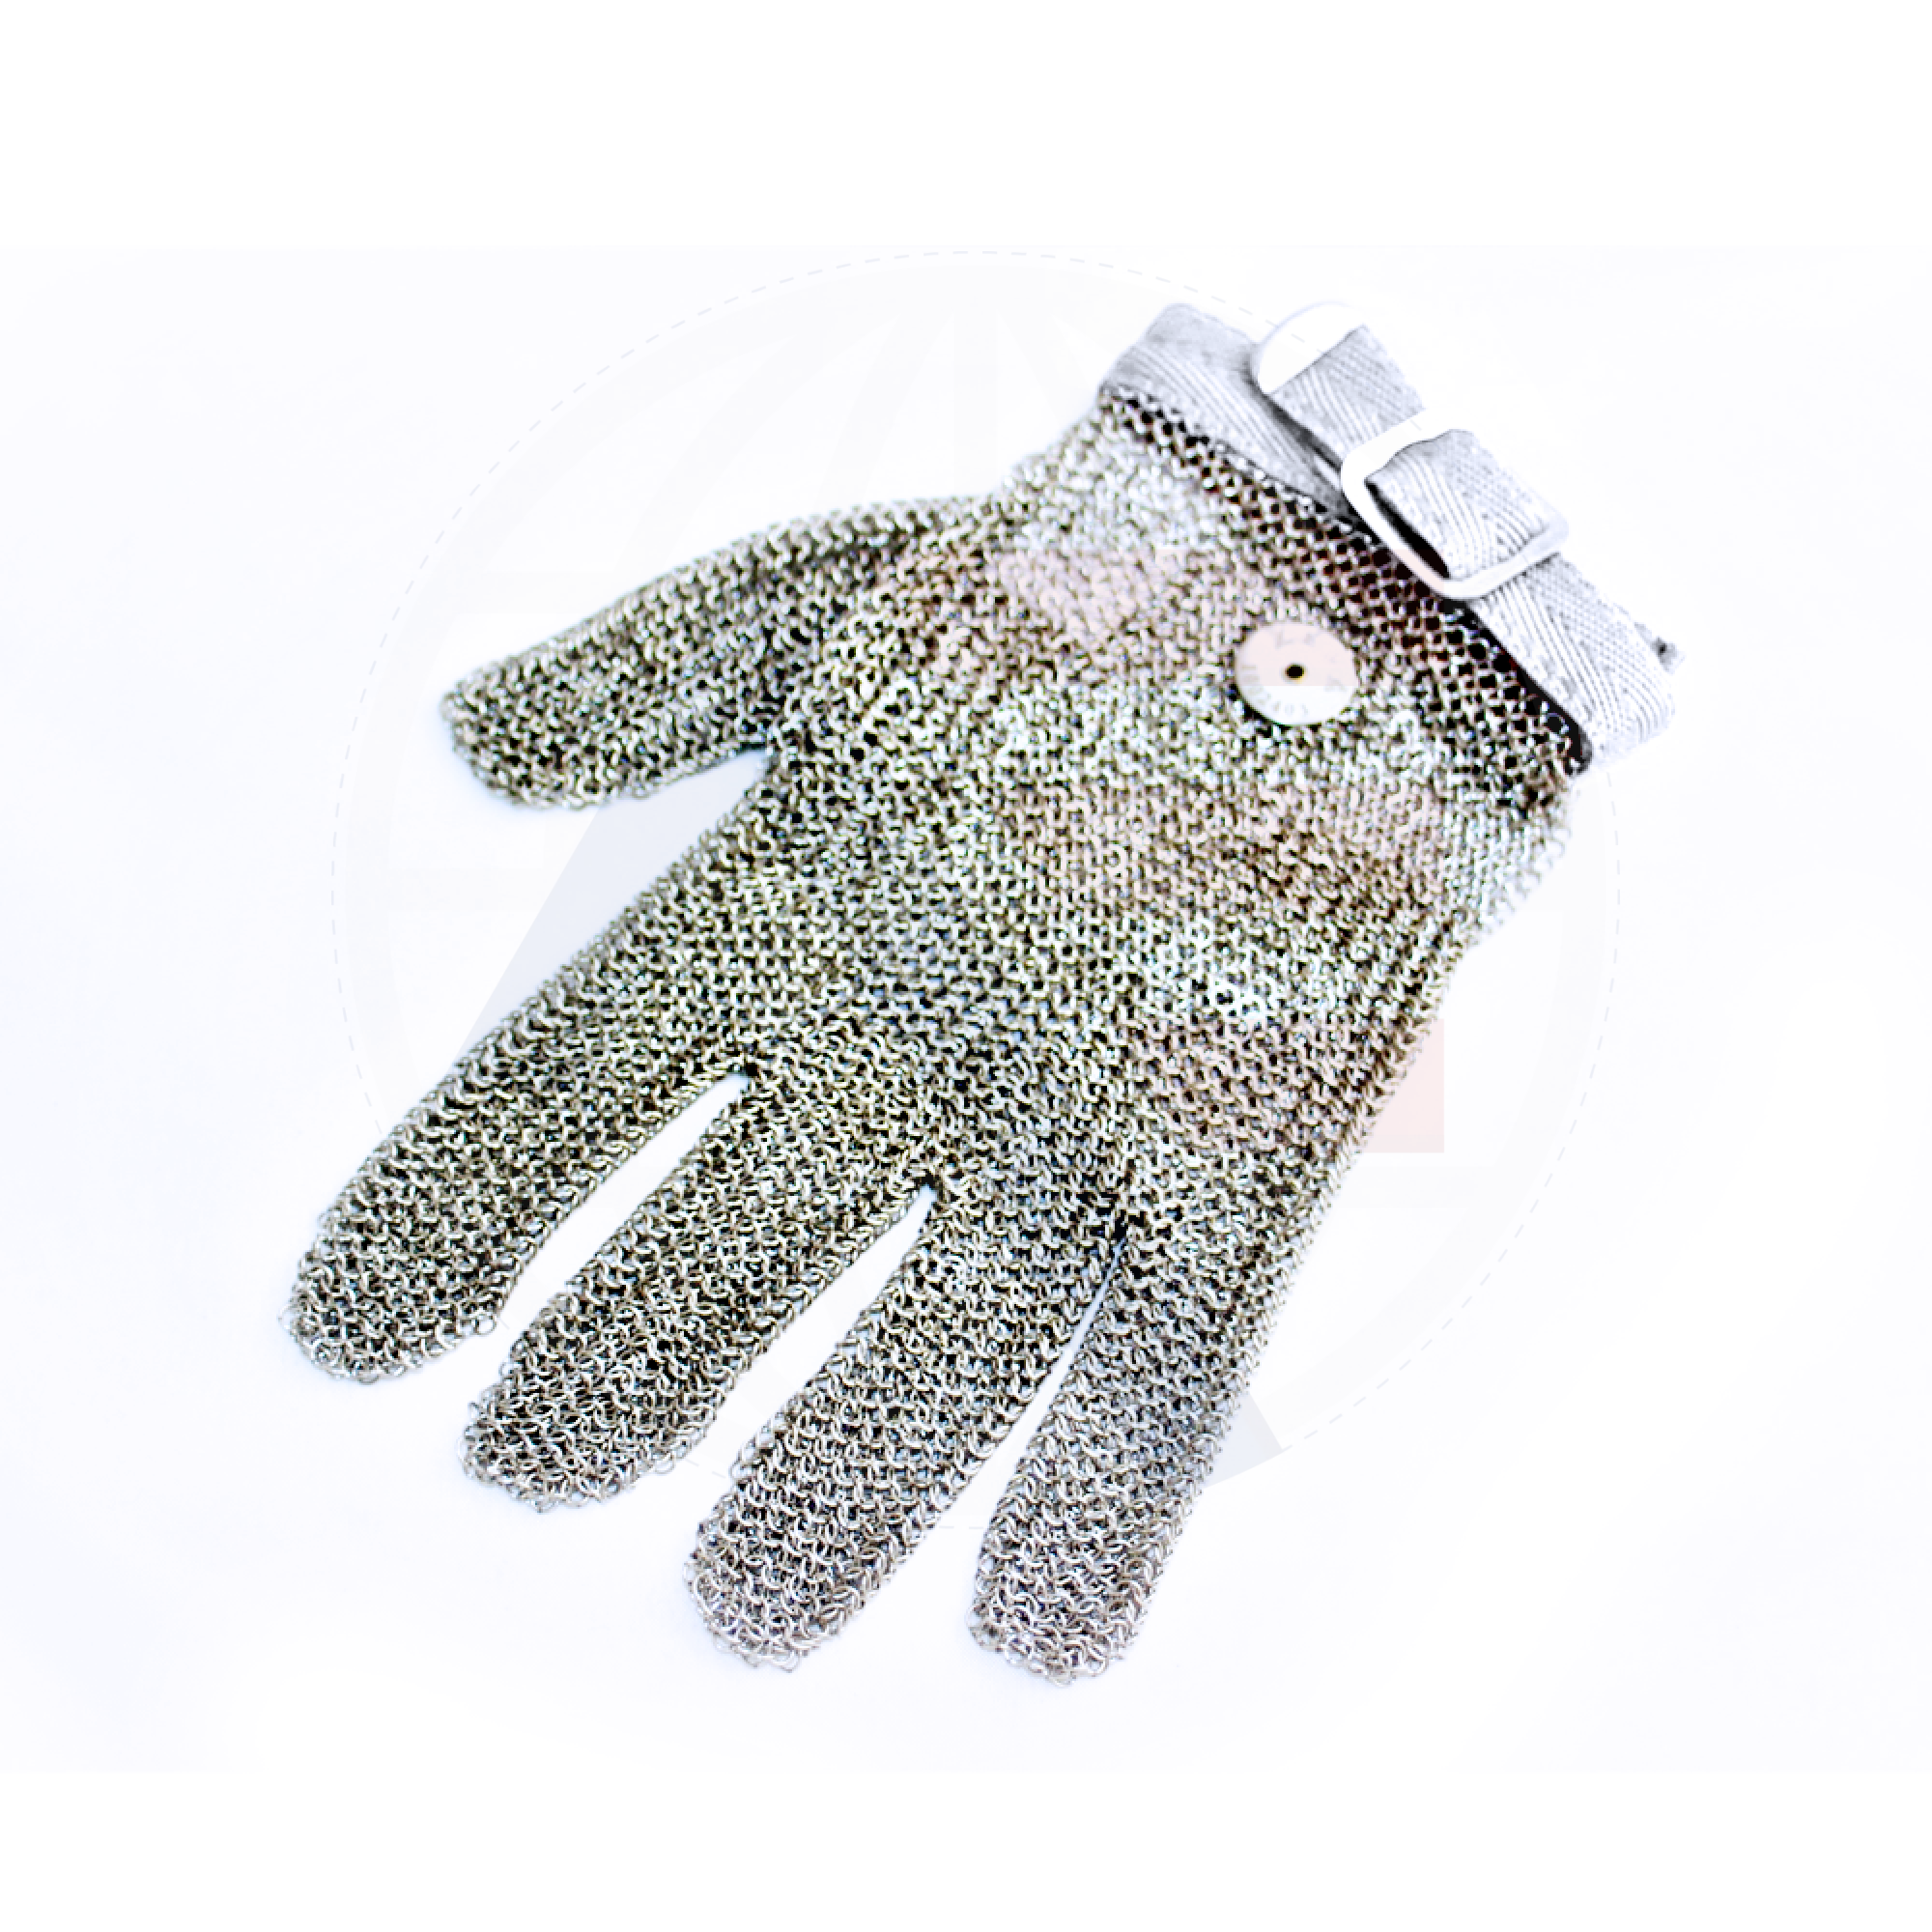 Chainmailglove Protective Safety Glove S